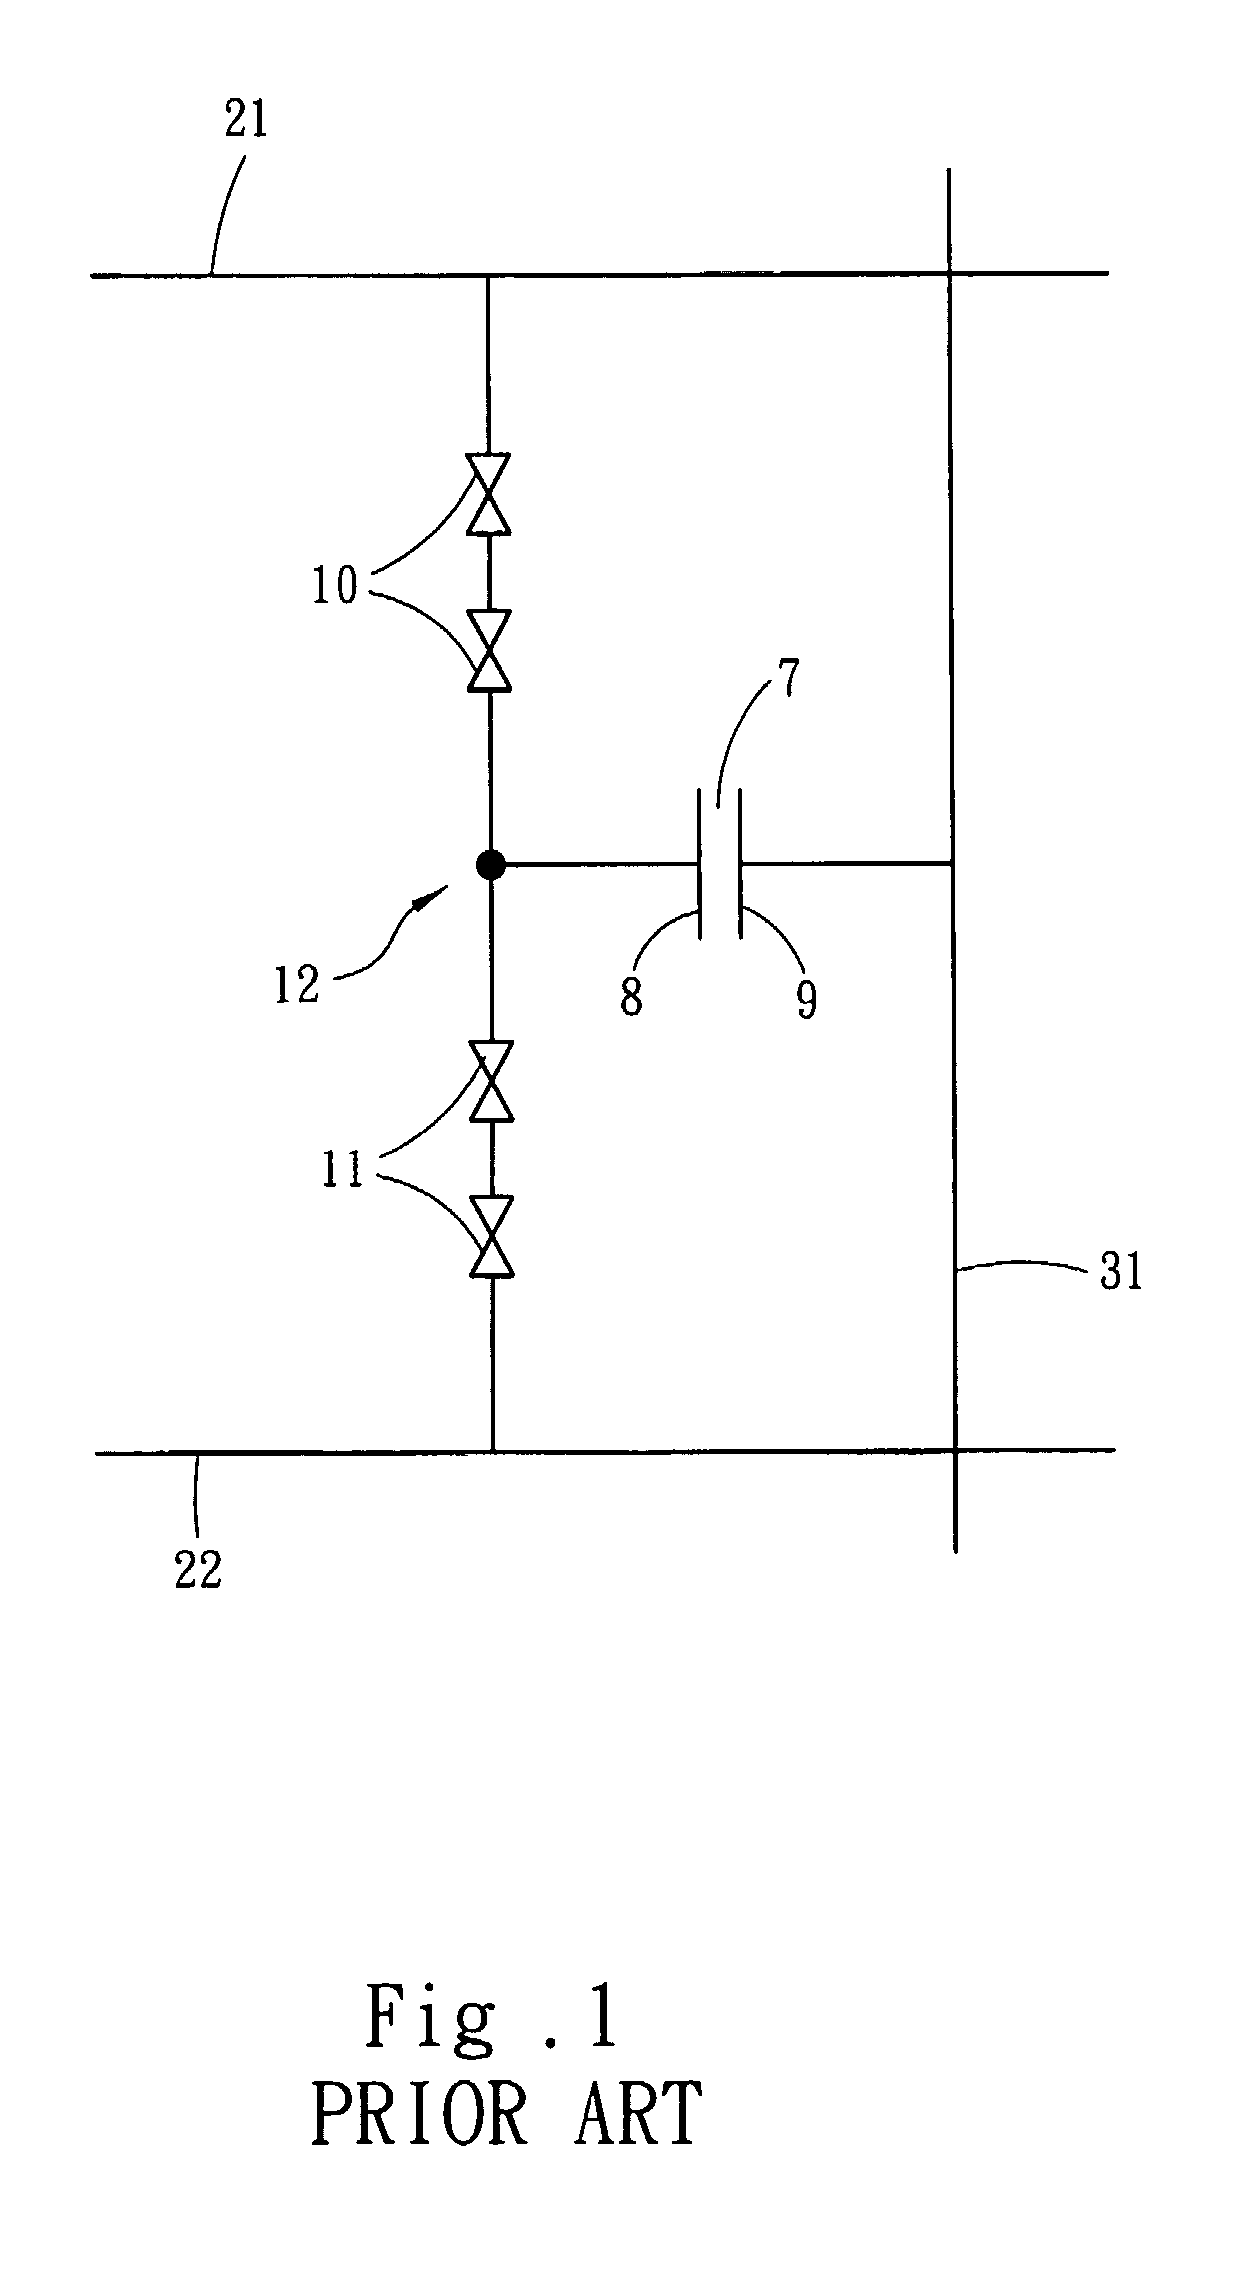 Structure and driving method for active photoelectric element